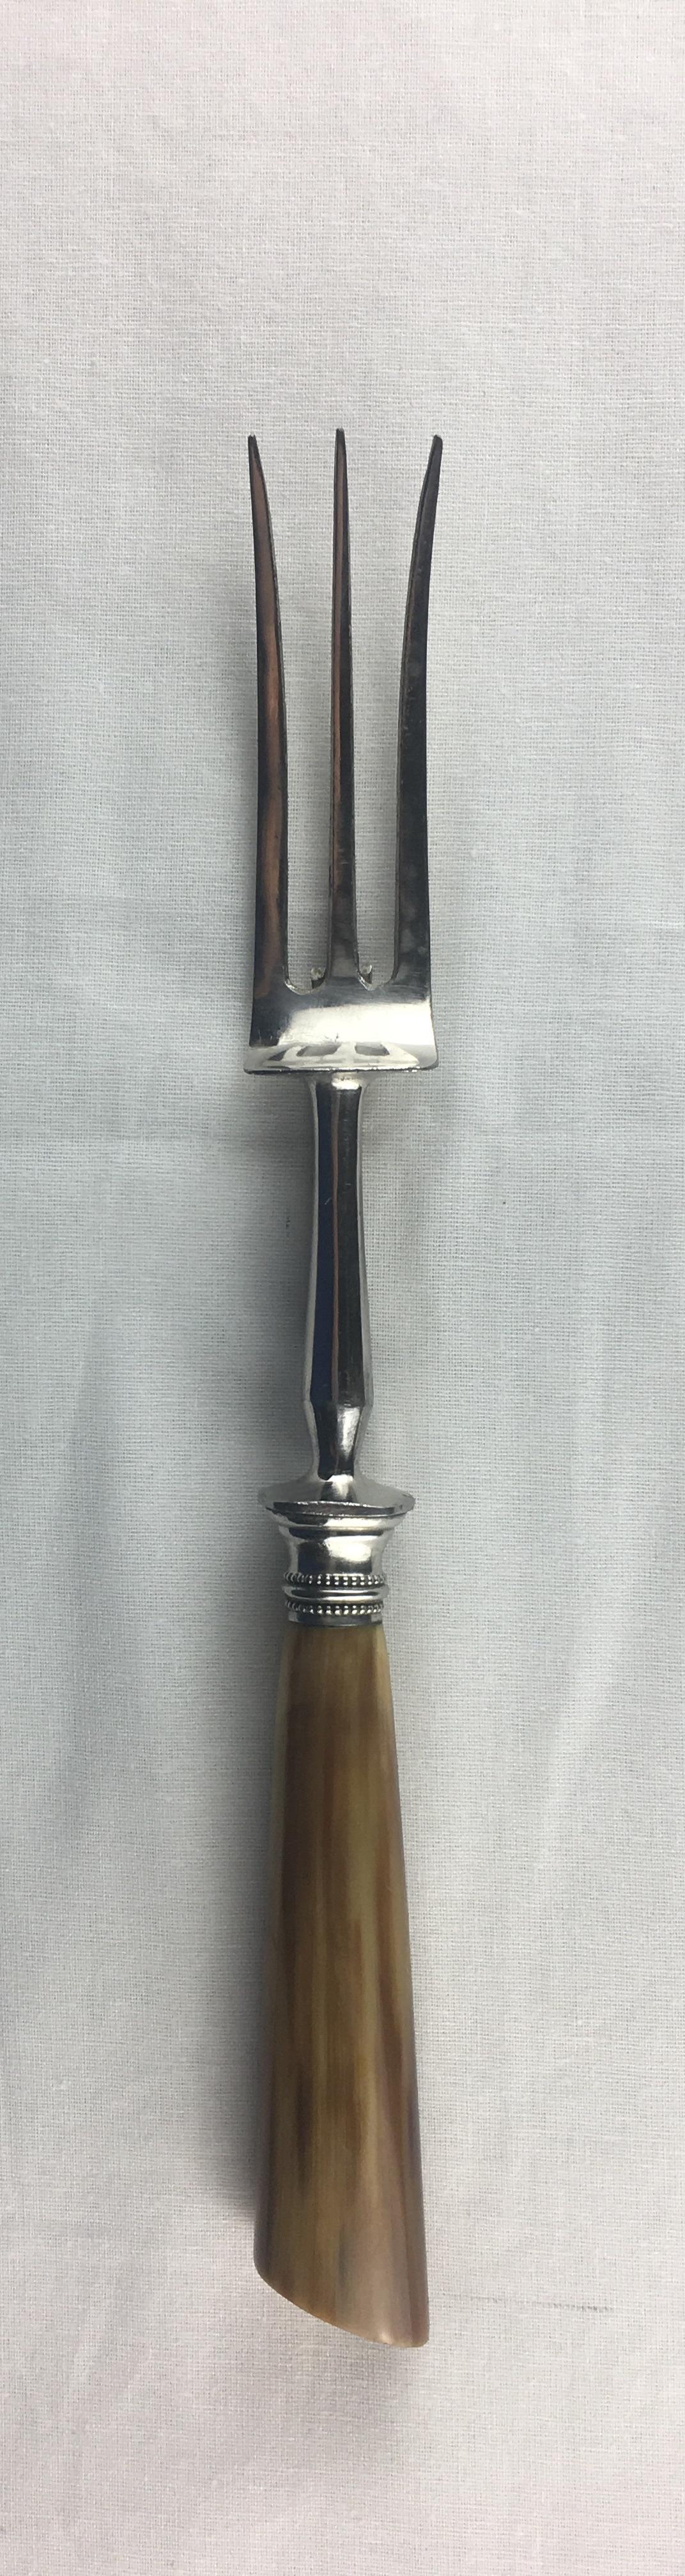 French horn, silver and stainless steel carving service comprising a knife, a fork and a handle for holding a leg of lamb all with bone tines. 
Good condition consistent with age, some minor darkening due to use. 
Original box included, measures